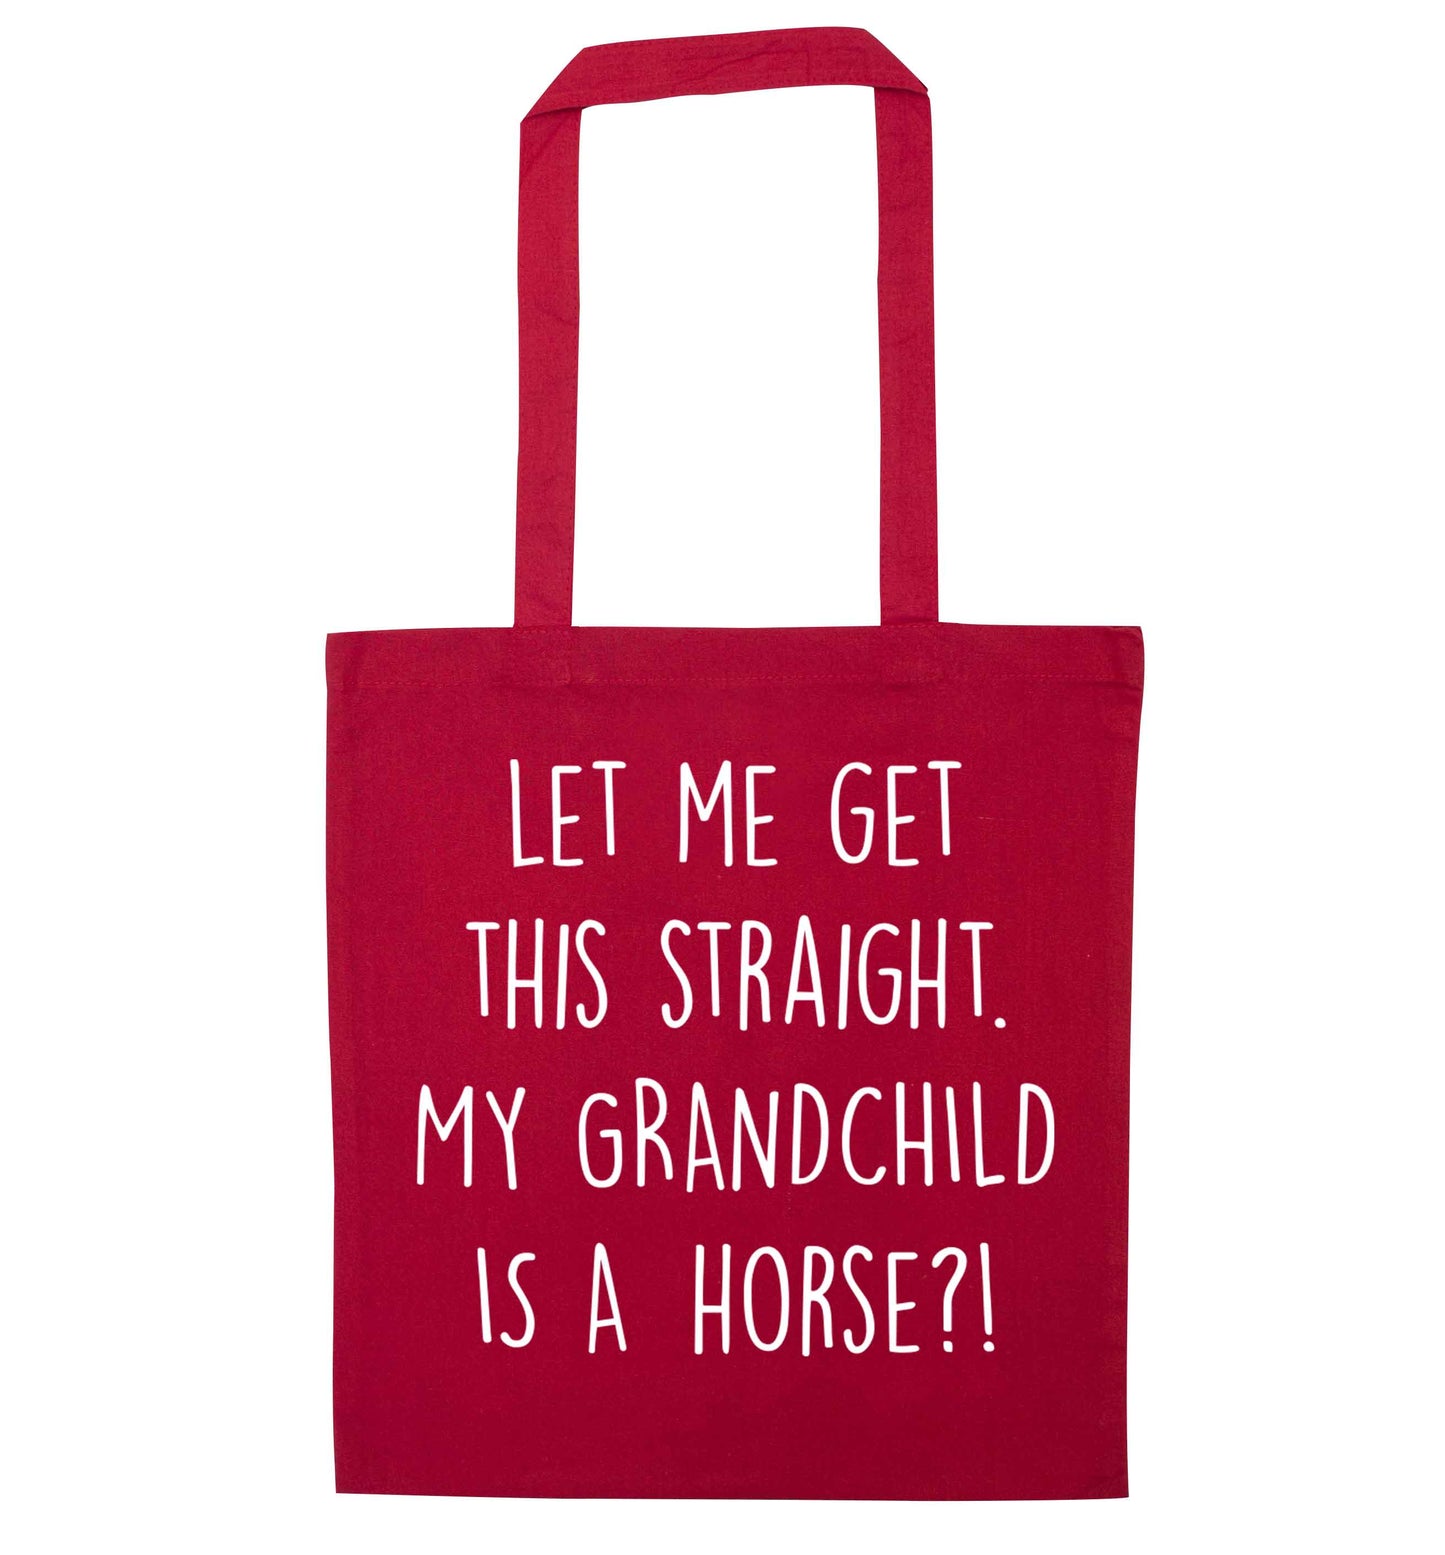 Let me get this straight, my grandchild is a horse?! red tote bag